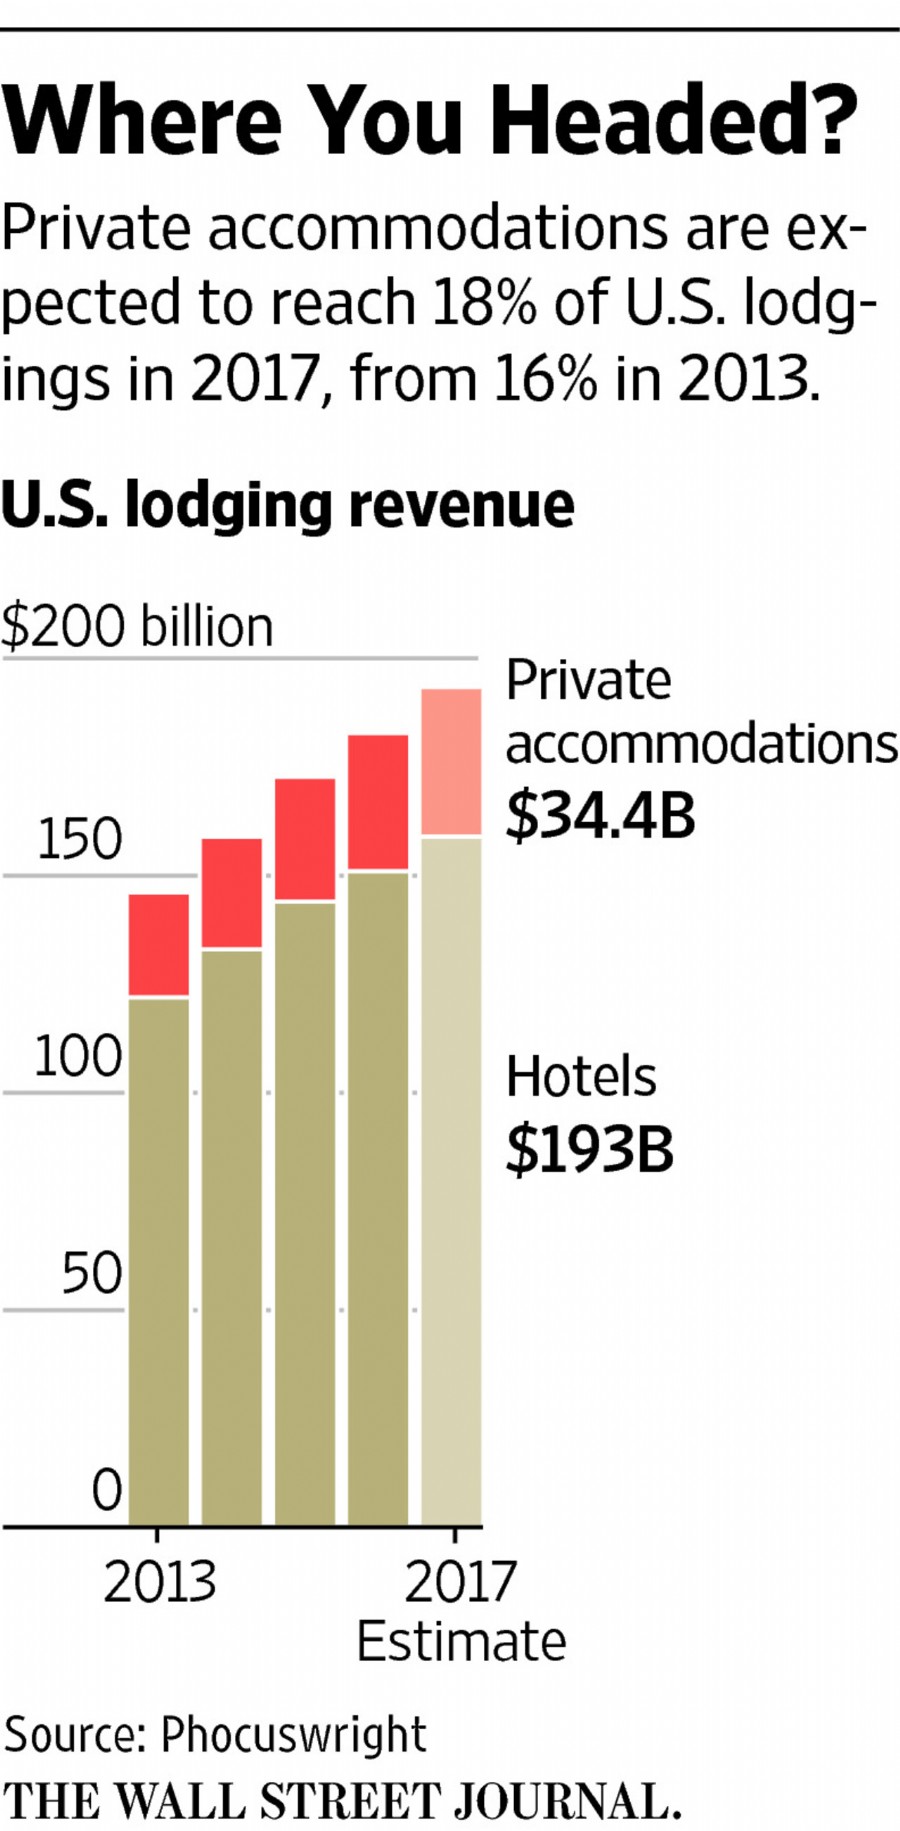 Expedia, Priceline Home In on Airbnb’s Turf